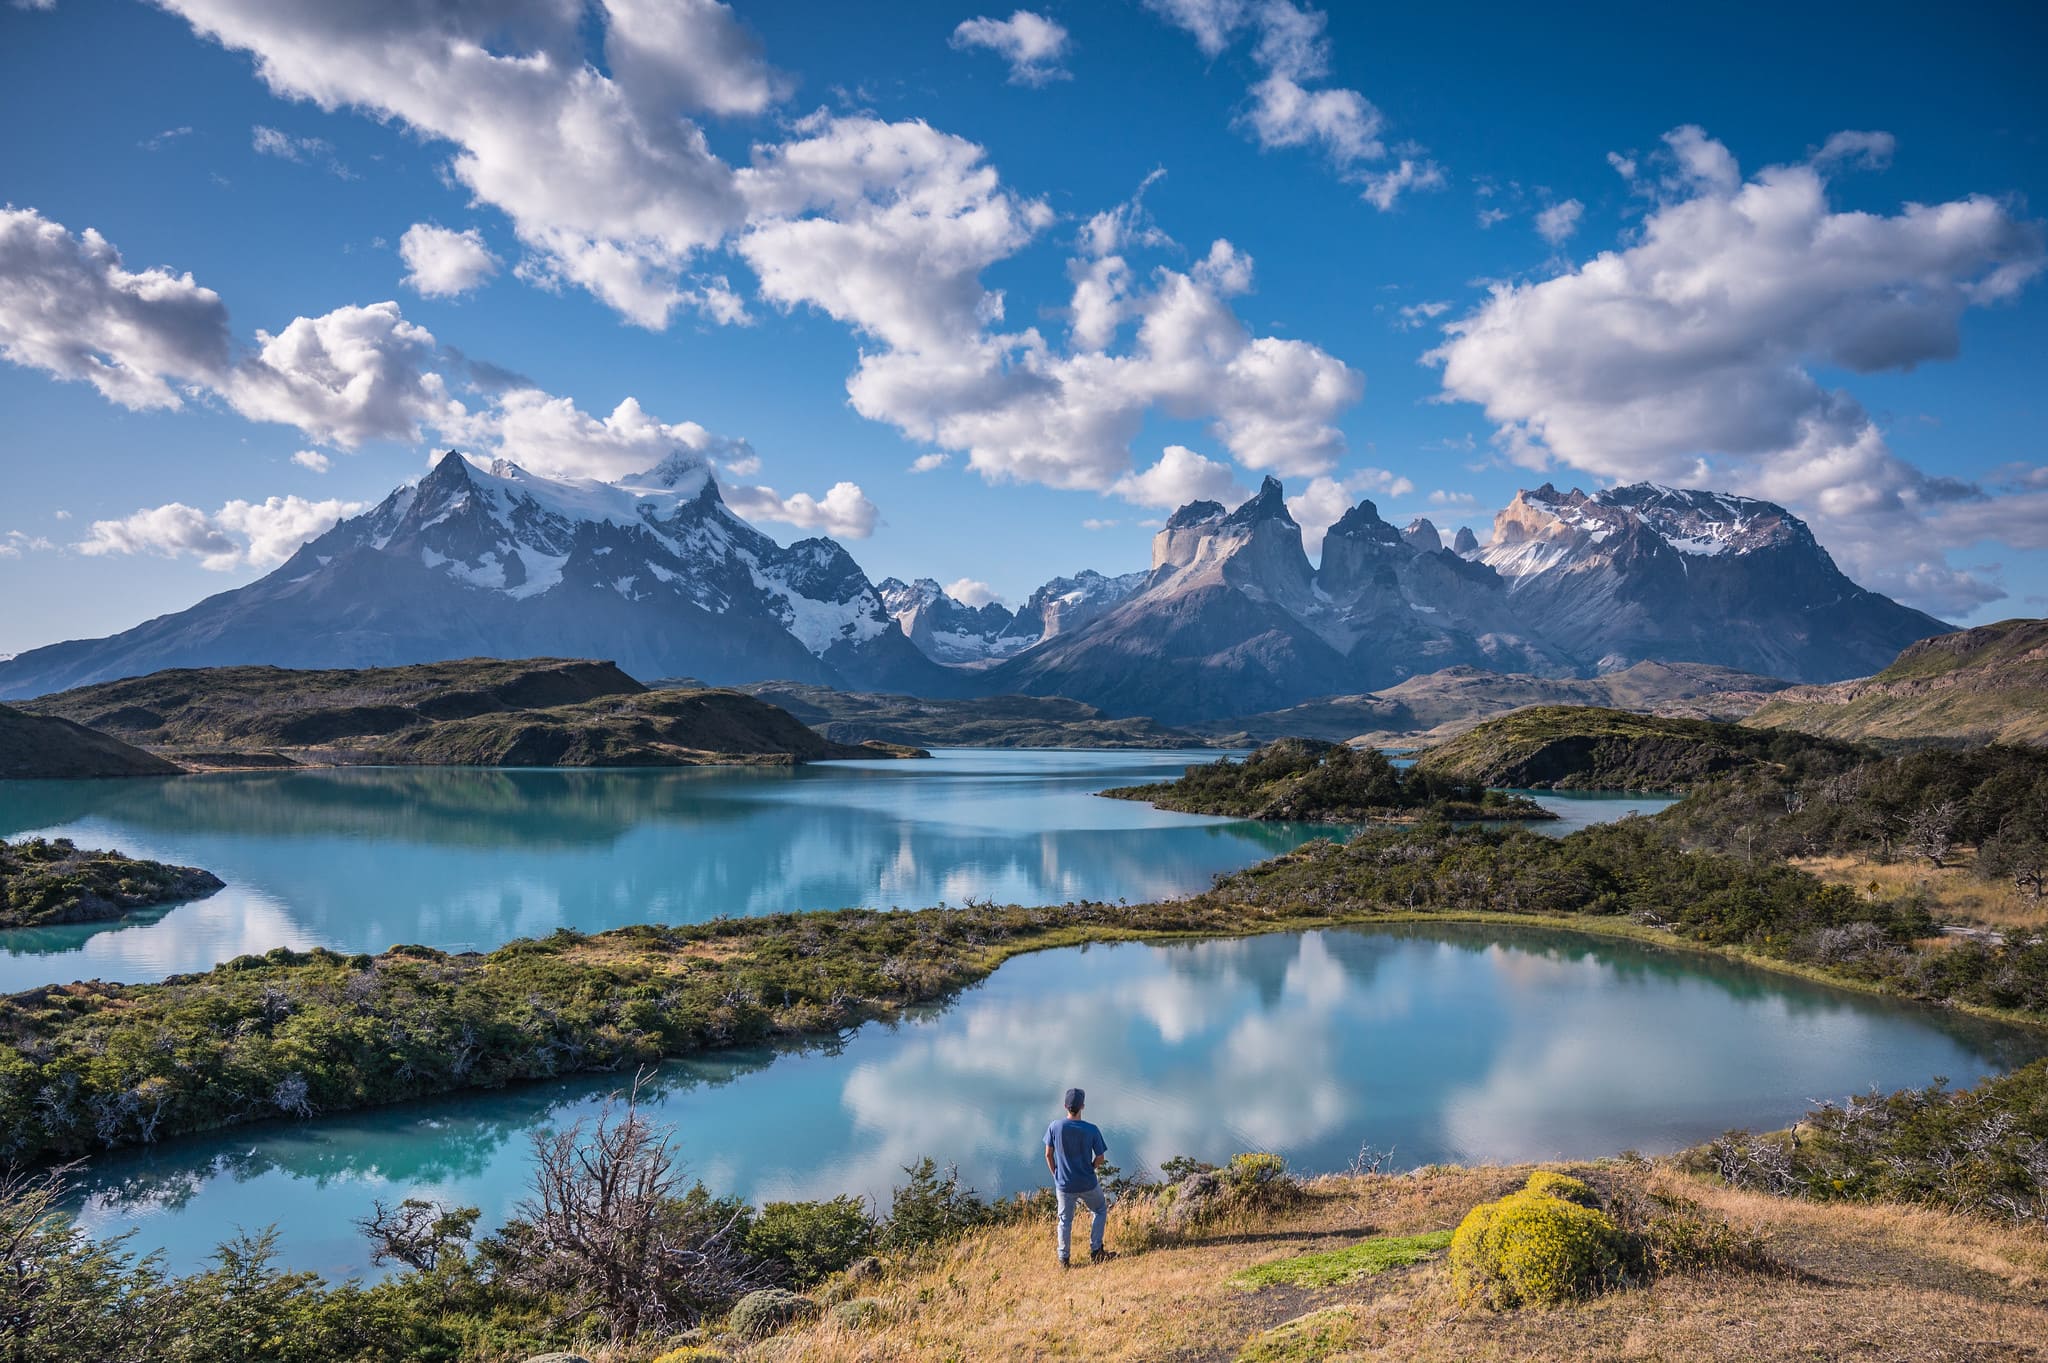 dato indebære initial 10 Reasons Why We Love Patagonia